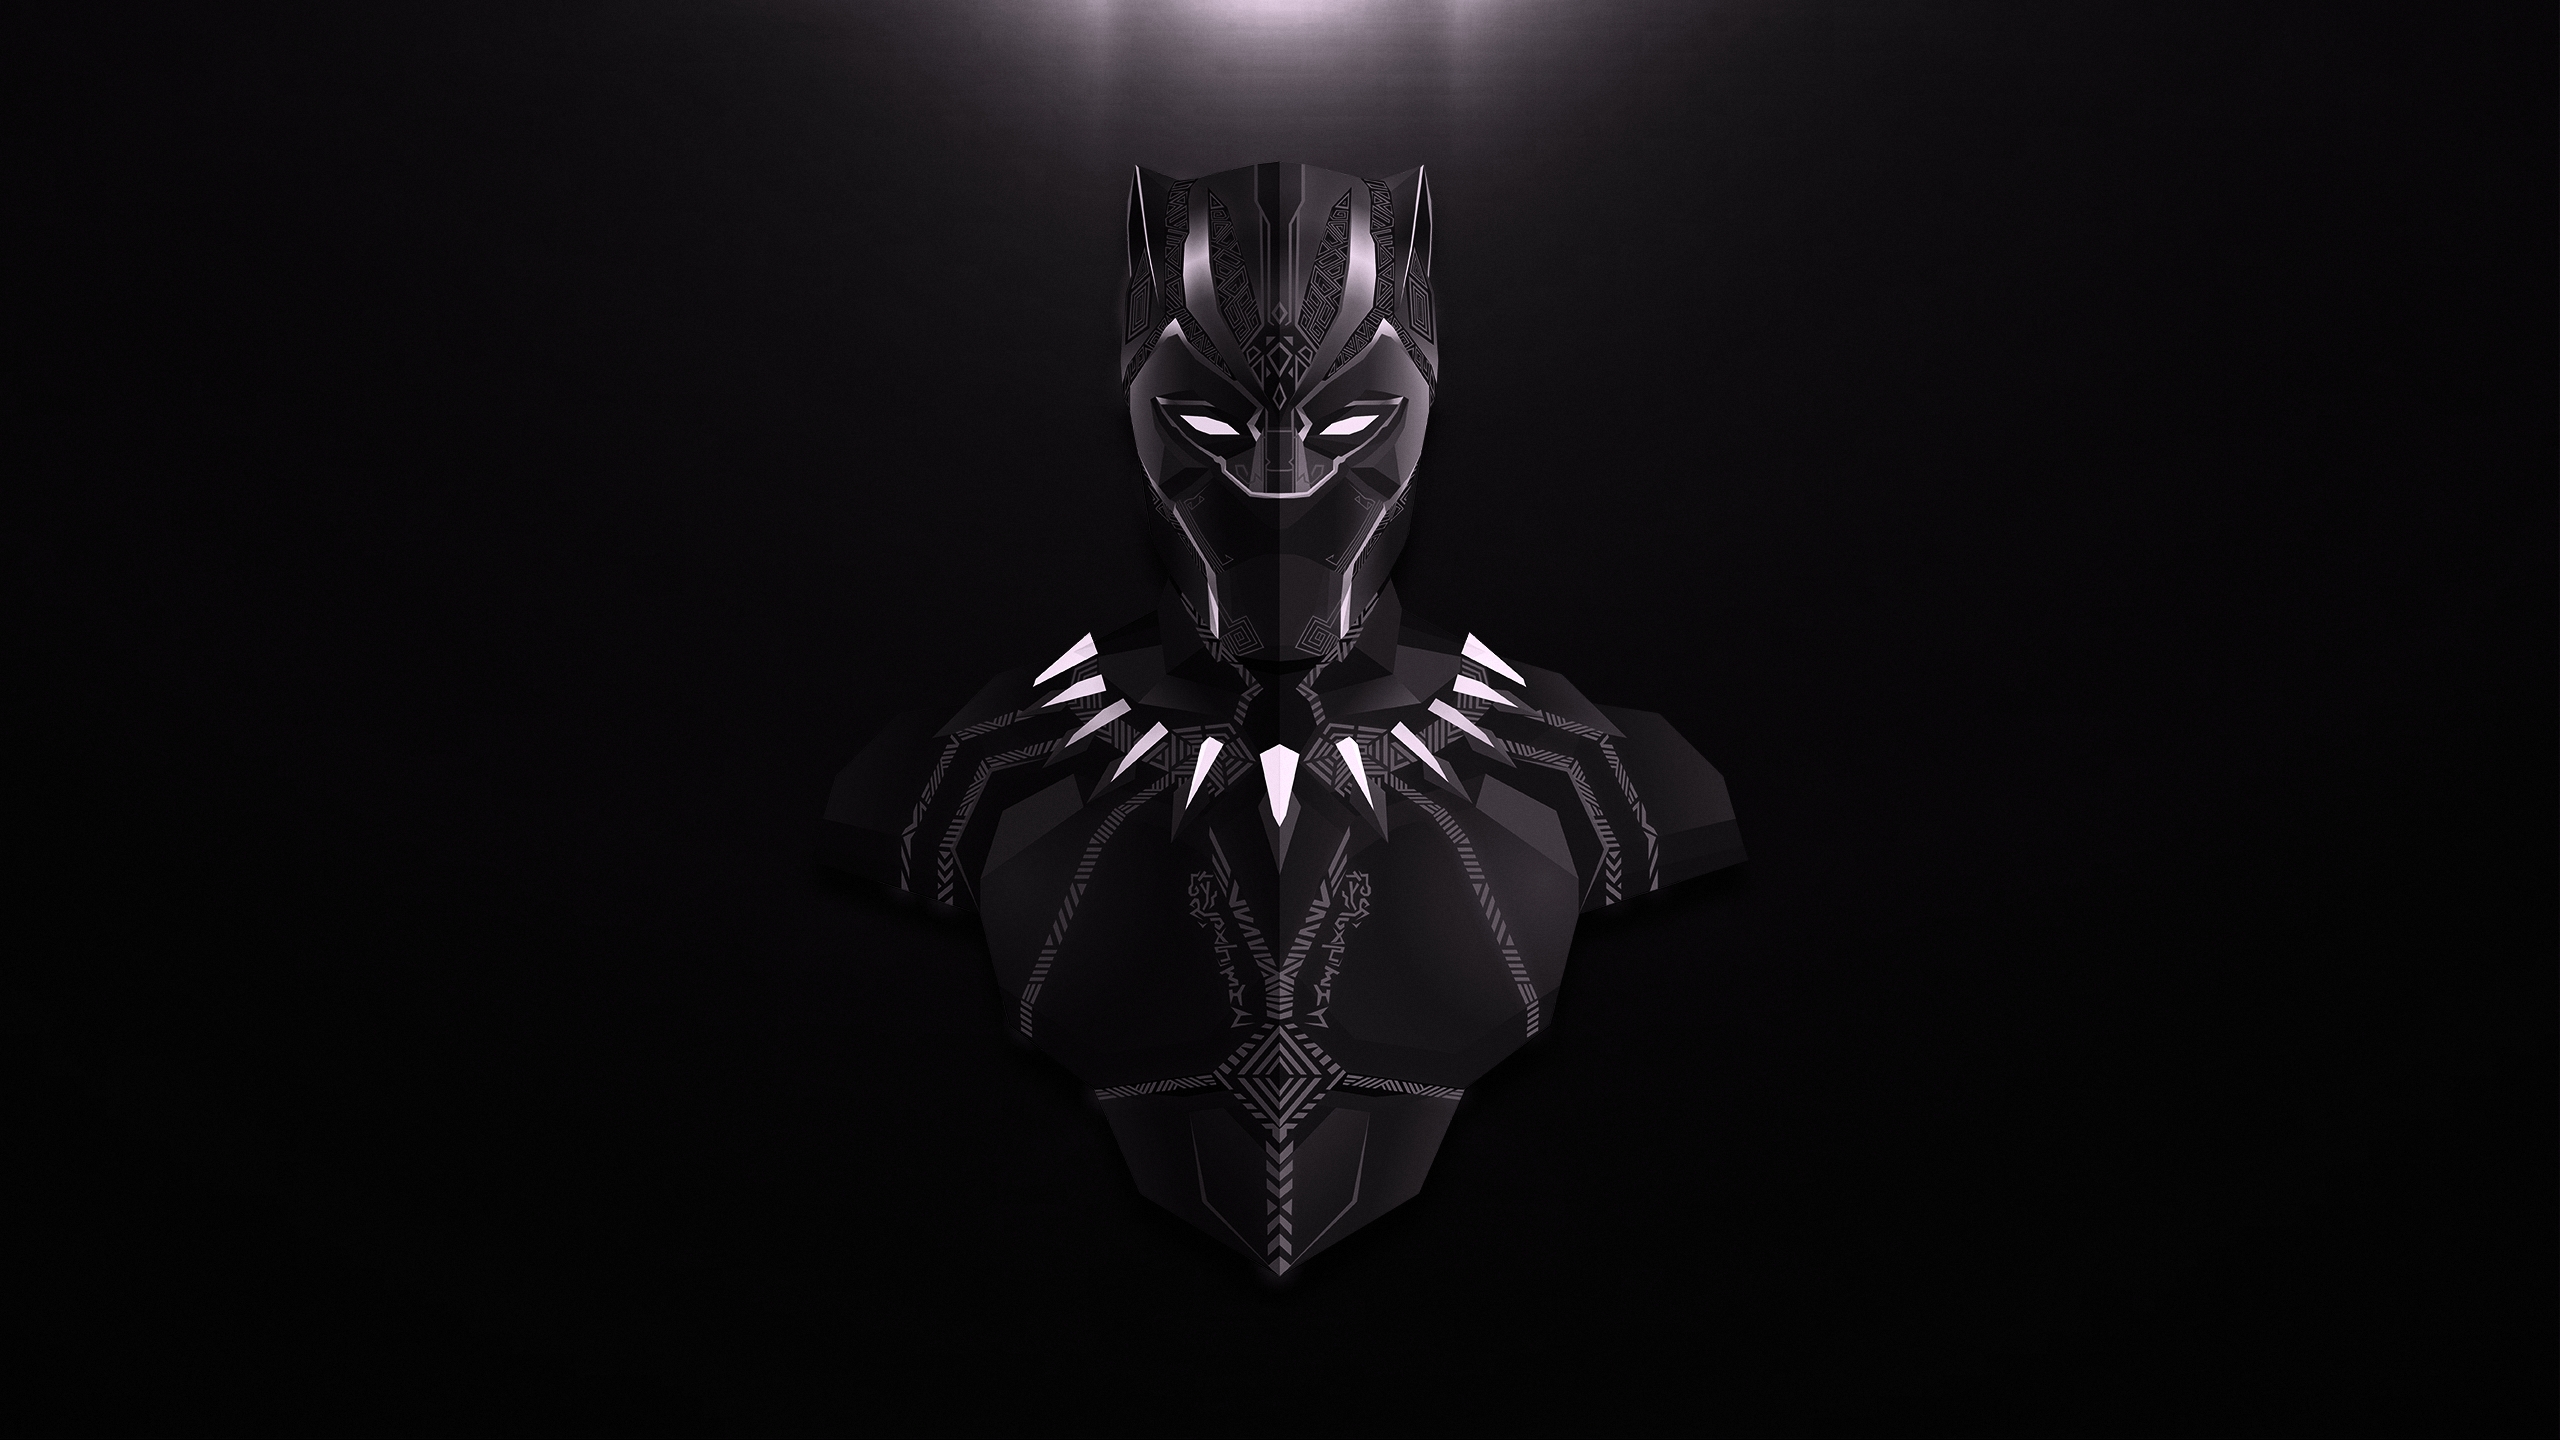 Black Panther Lowpoly Minimalist, HD Superheroes, 4k Wallpapers, Images